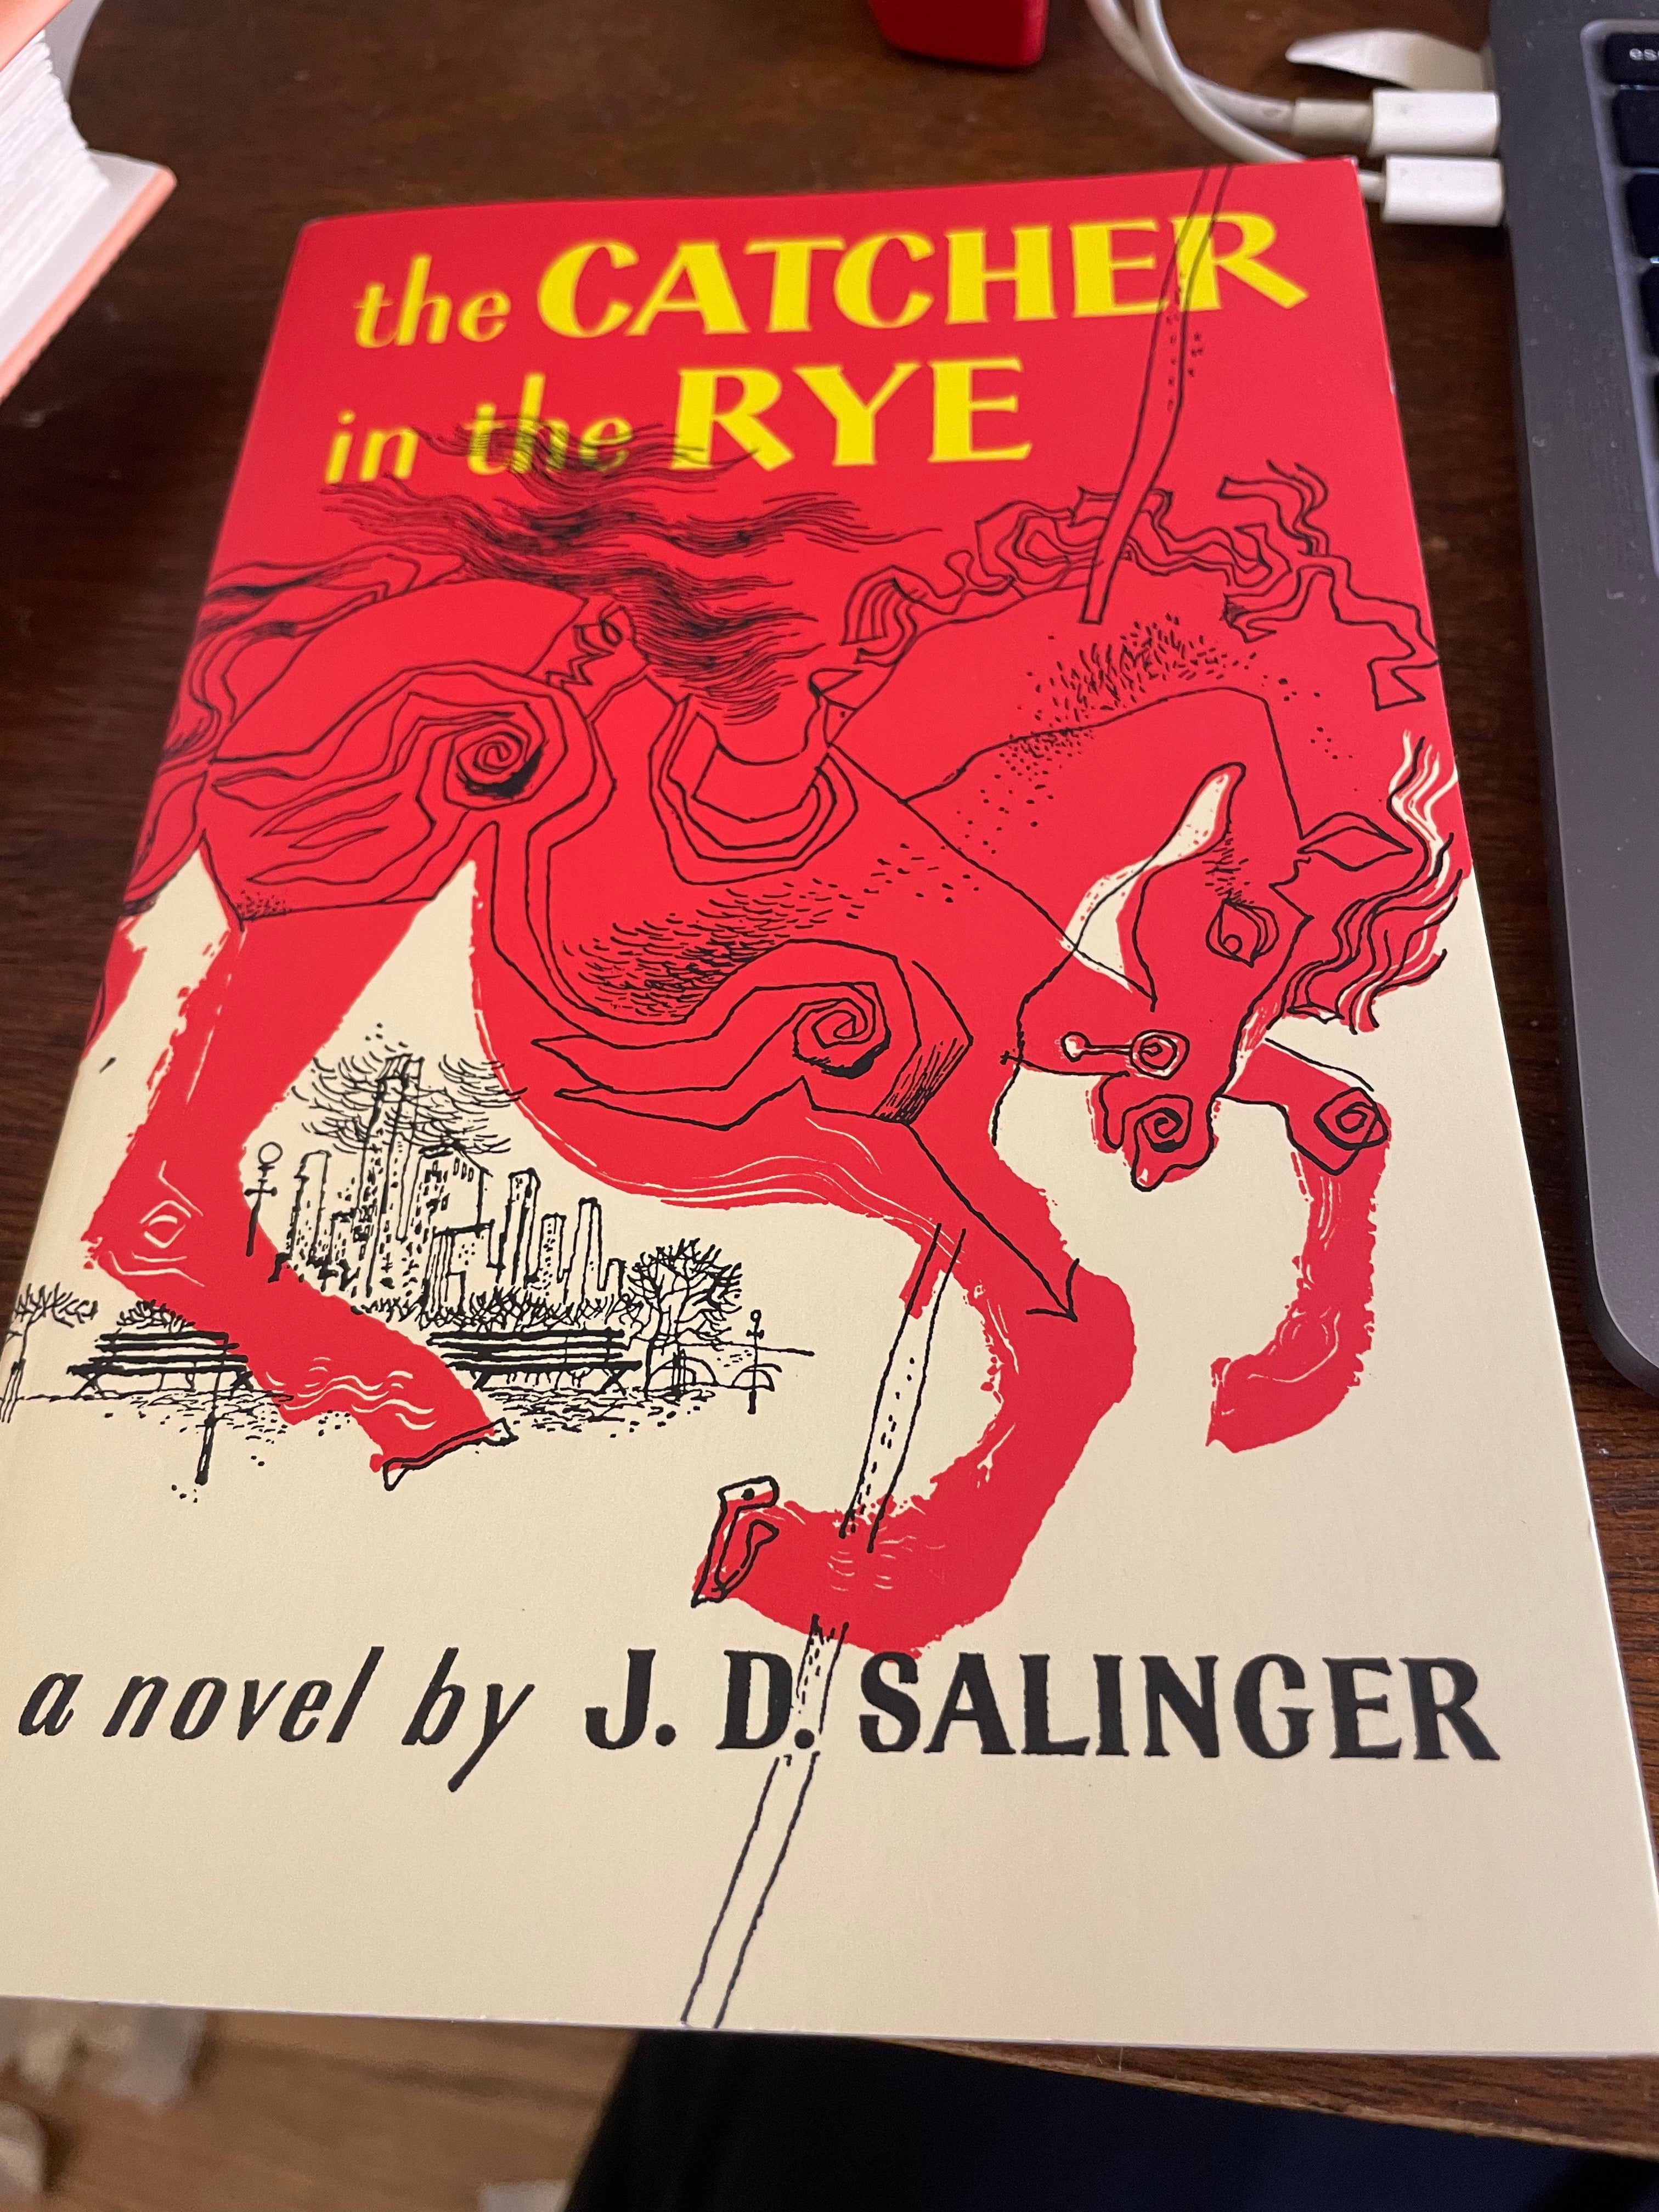 Book Package: The Catcher in the Rye